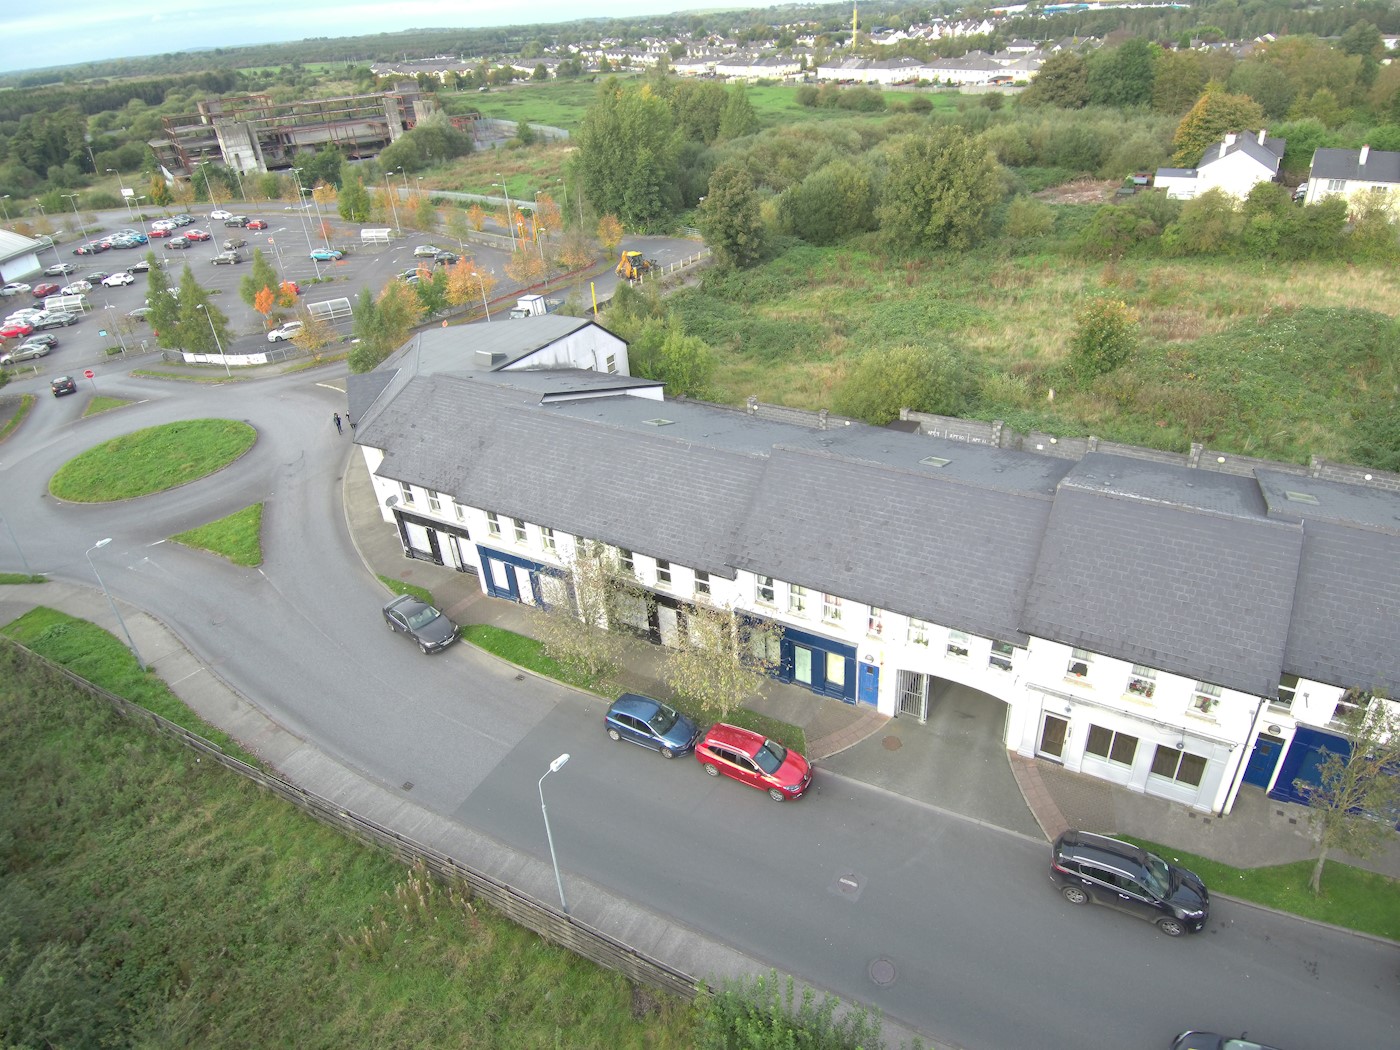 Units at Father McWey Street, Edenderry, Co. Offaly 1/21